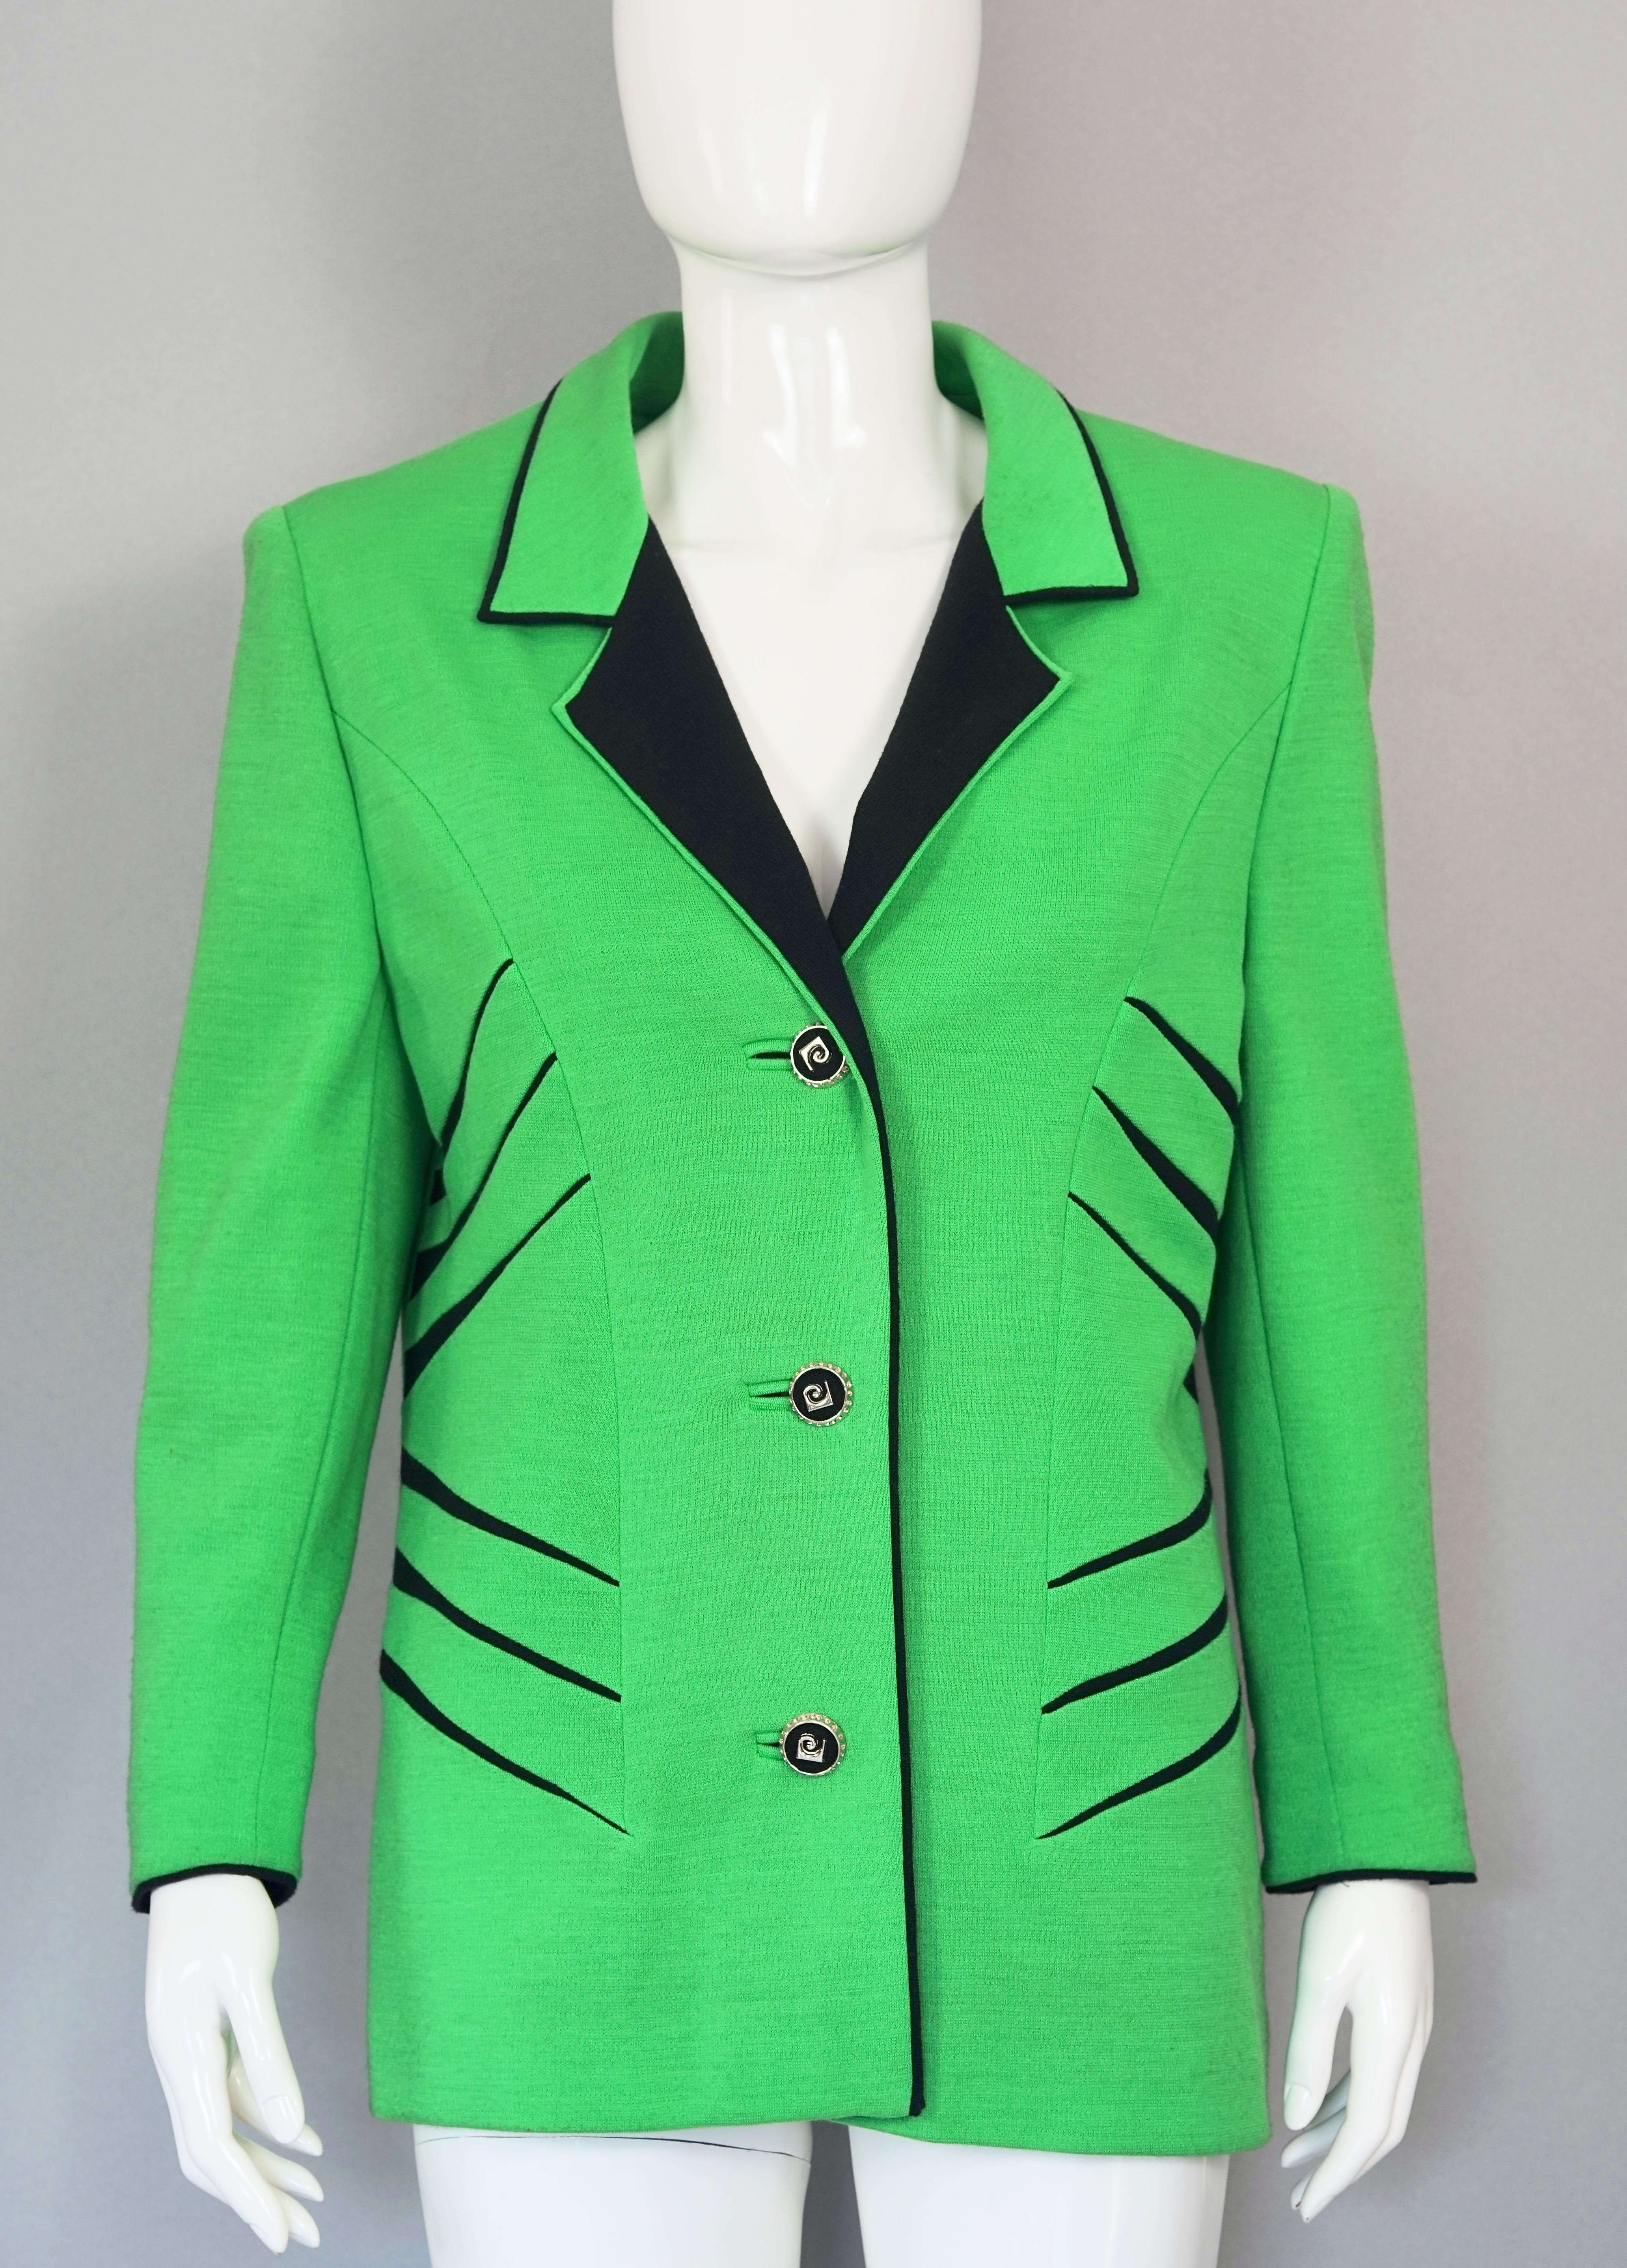 Vintage PIERRE CARDIN Futuristic Green Black Contrast Jacket
From 1997-1998 Autumn/ Winter Collection

Measurements taken laid flat, double bust and waist:
Shoulder: 16.53 inches (42 cm)
Sleeves: 22.44 inches (57 cm)
Bust: 19.29 inches (49